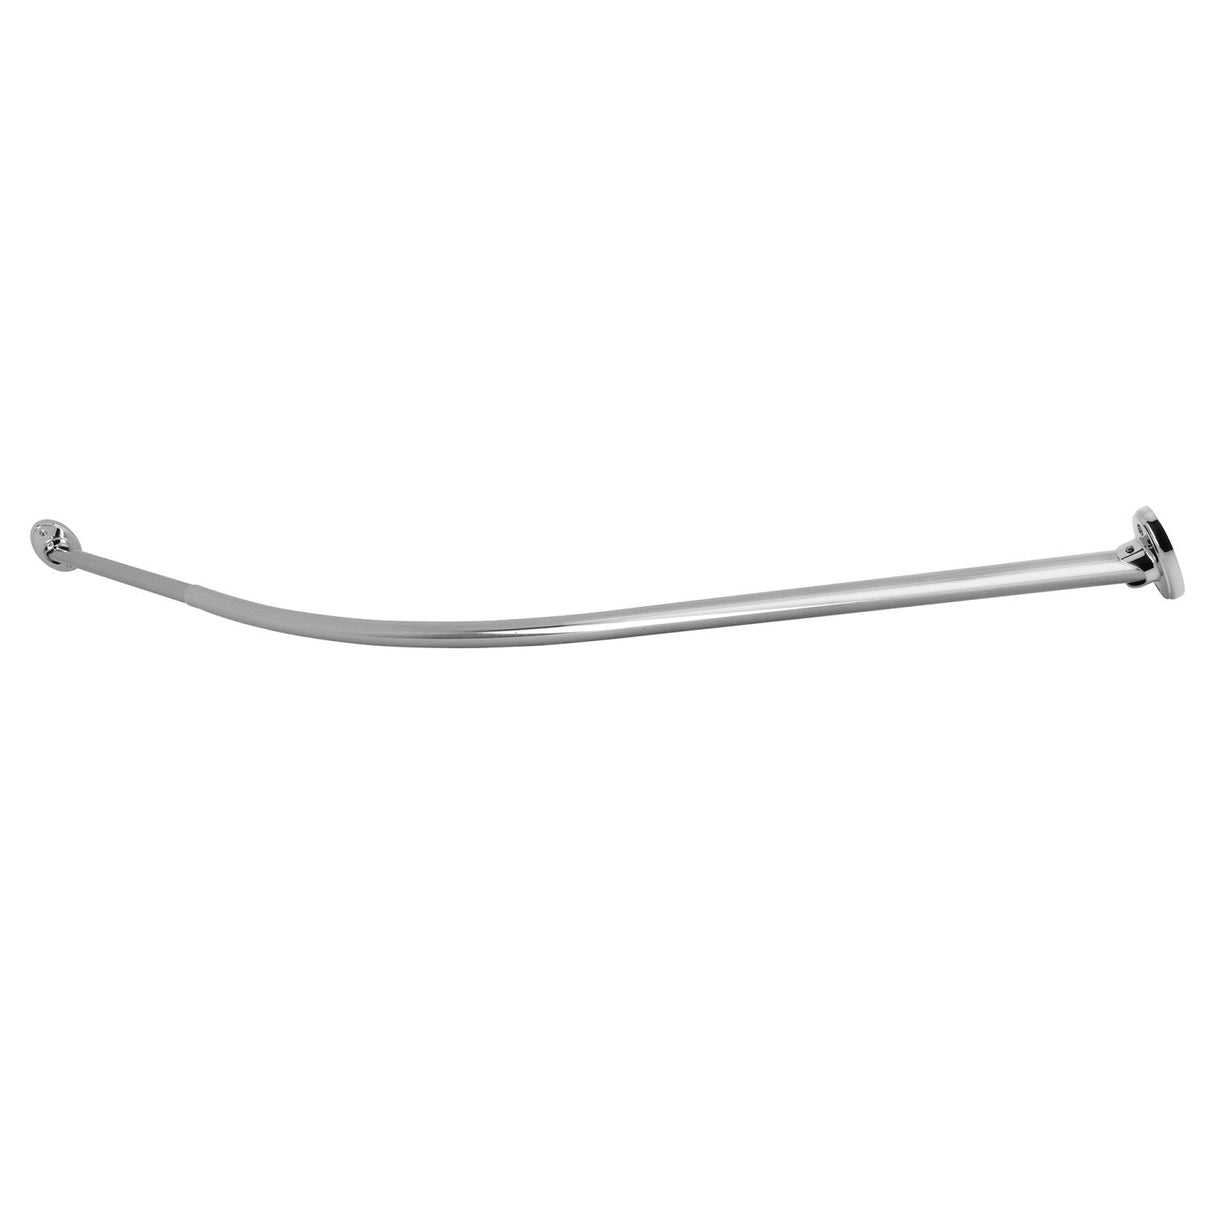 Edenscape CC7211 72-Inch Stainless Steel Single Curved Shower Curtain Rod, Polished Chrome